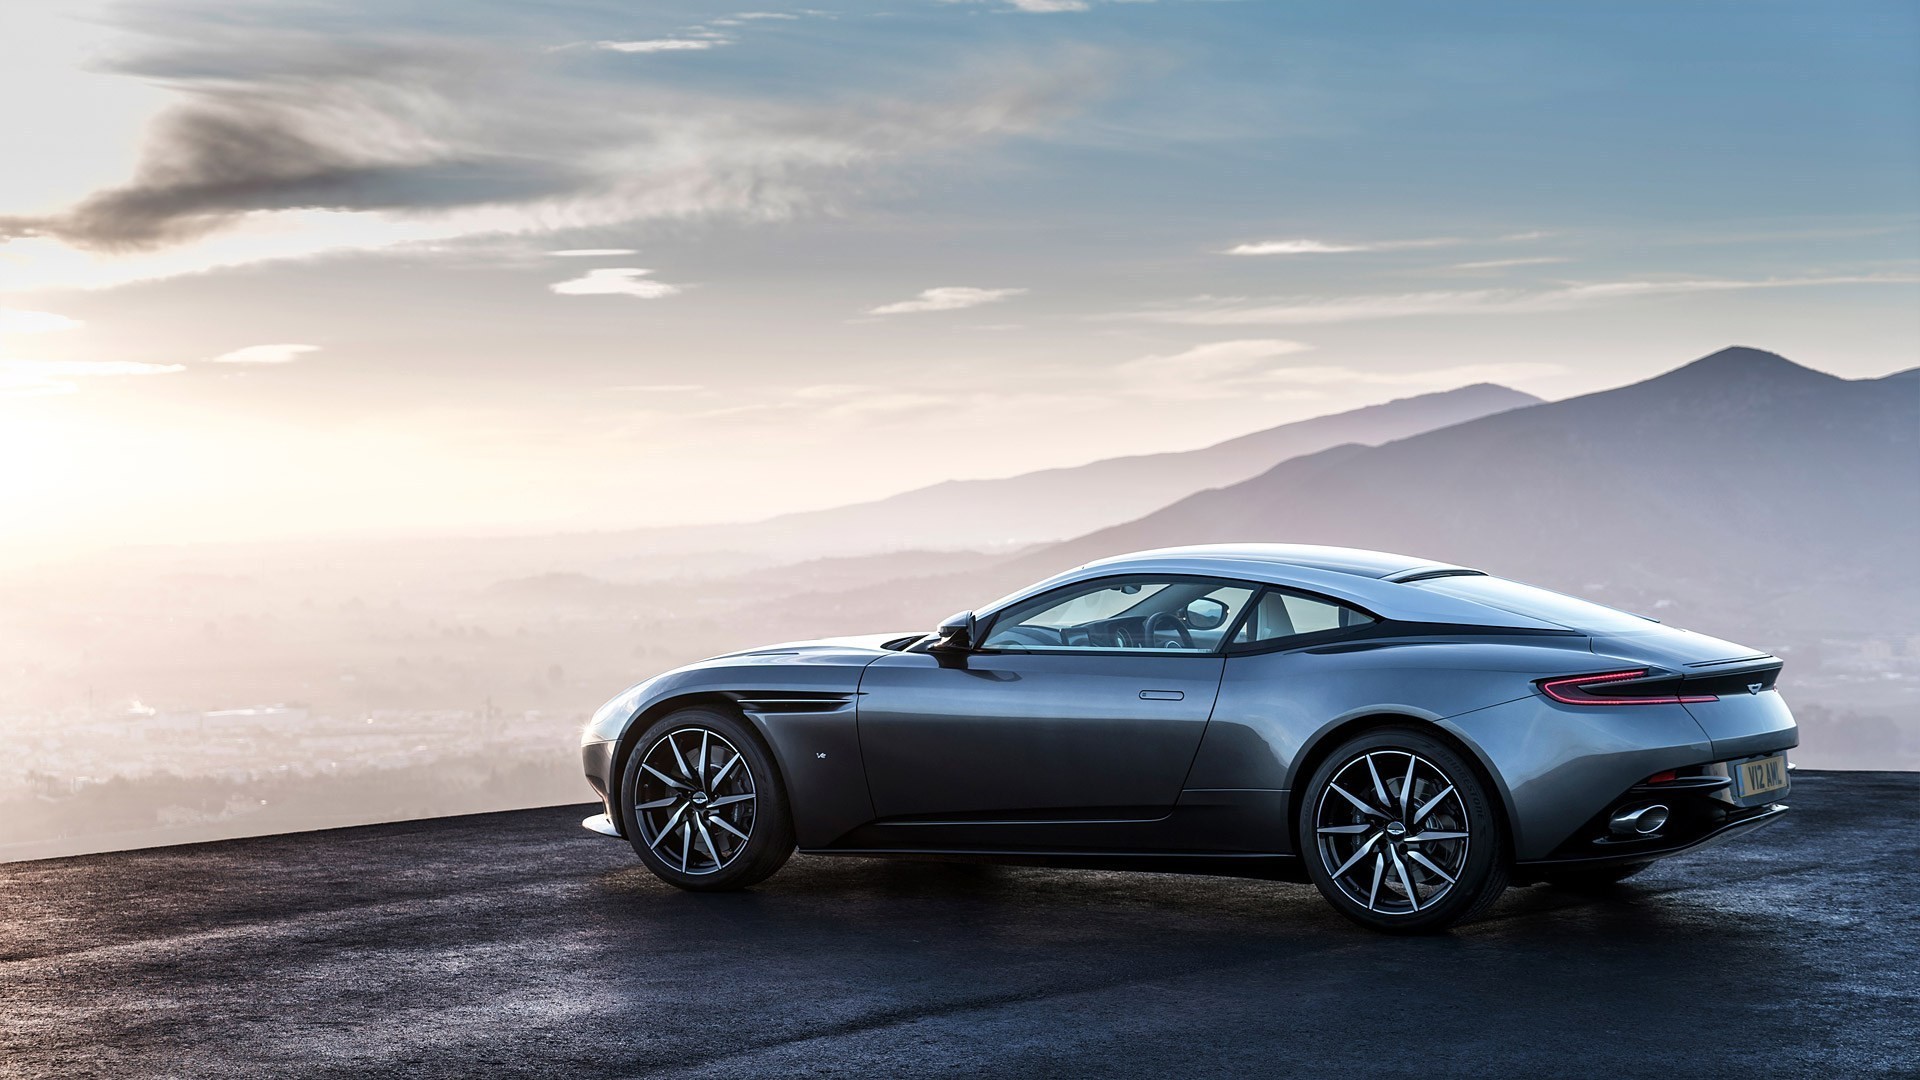 1920x1080 2017 Aston Martin Db11 Wallpapers Hd Images Wsupercars Top Gear Wallpaper